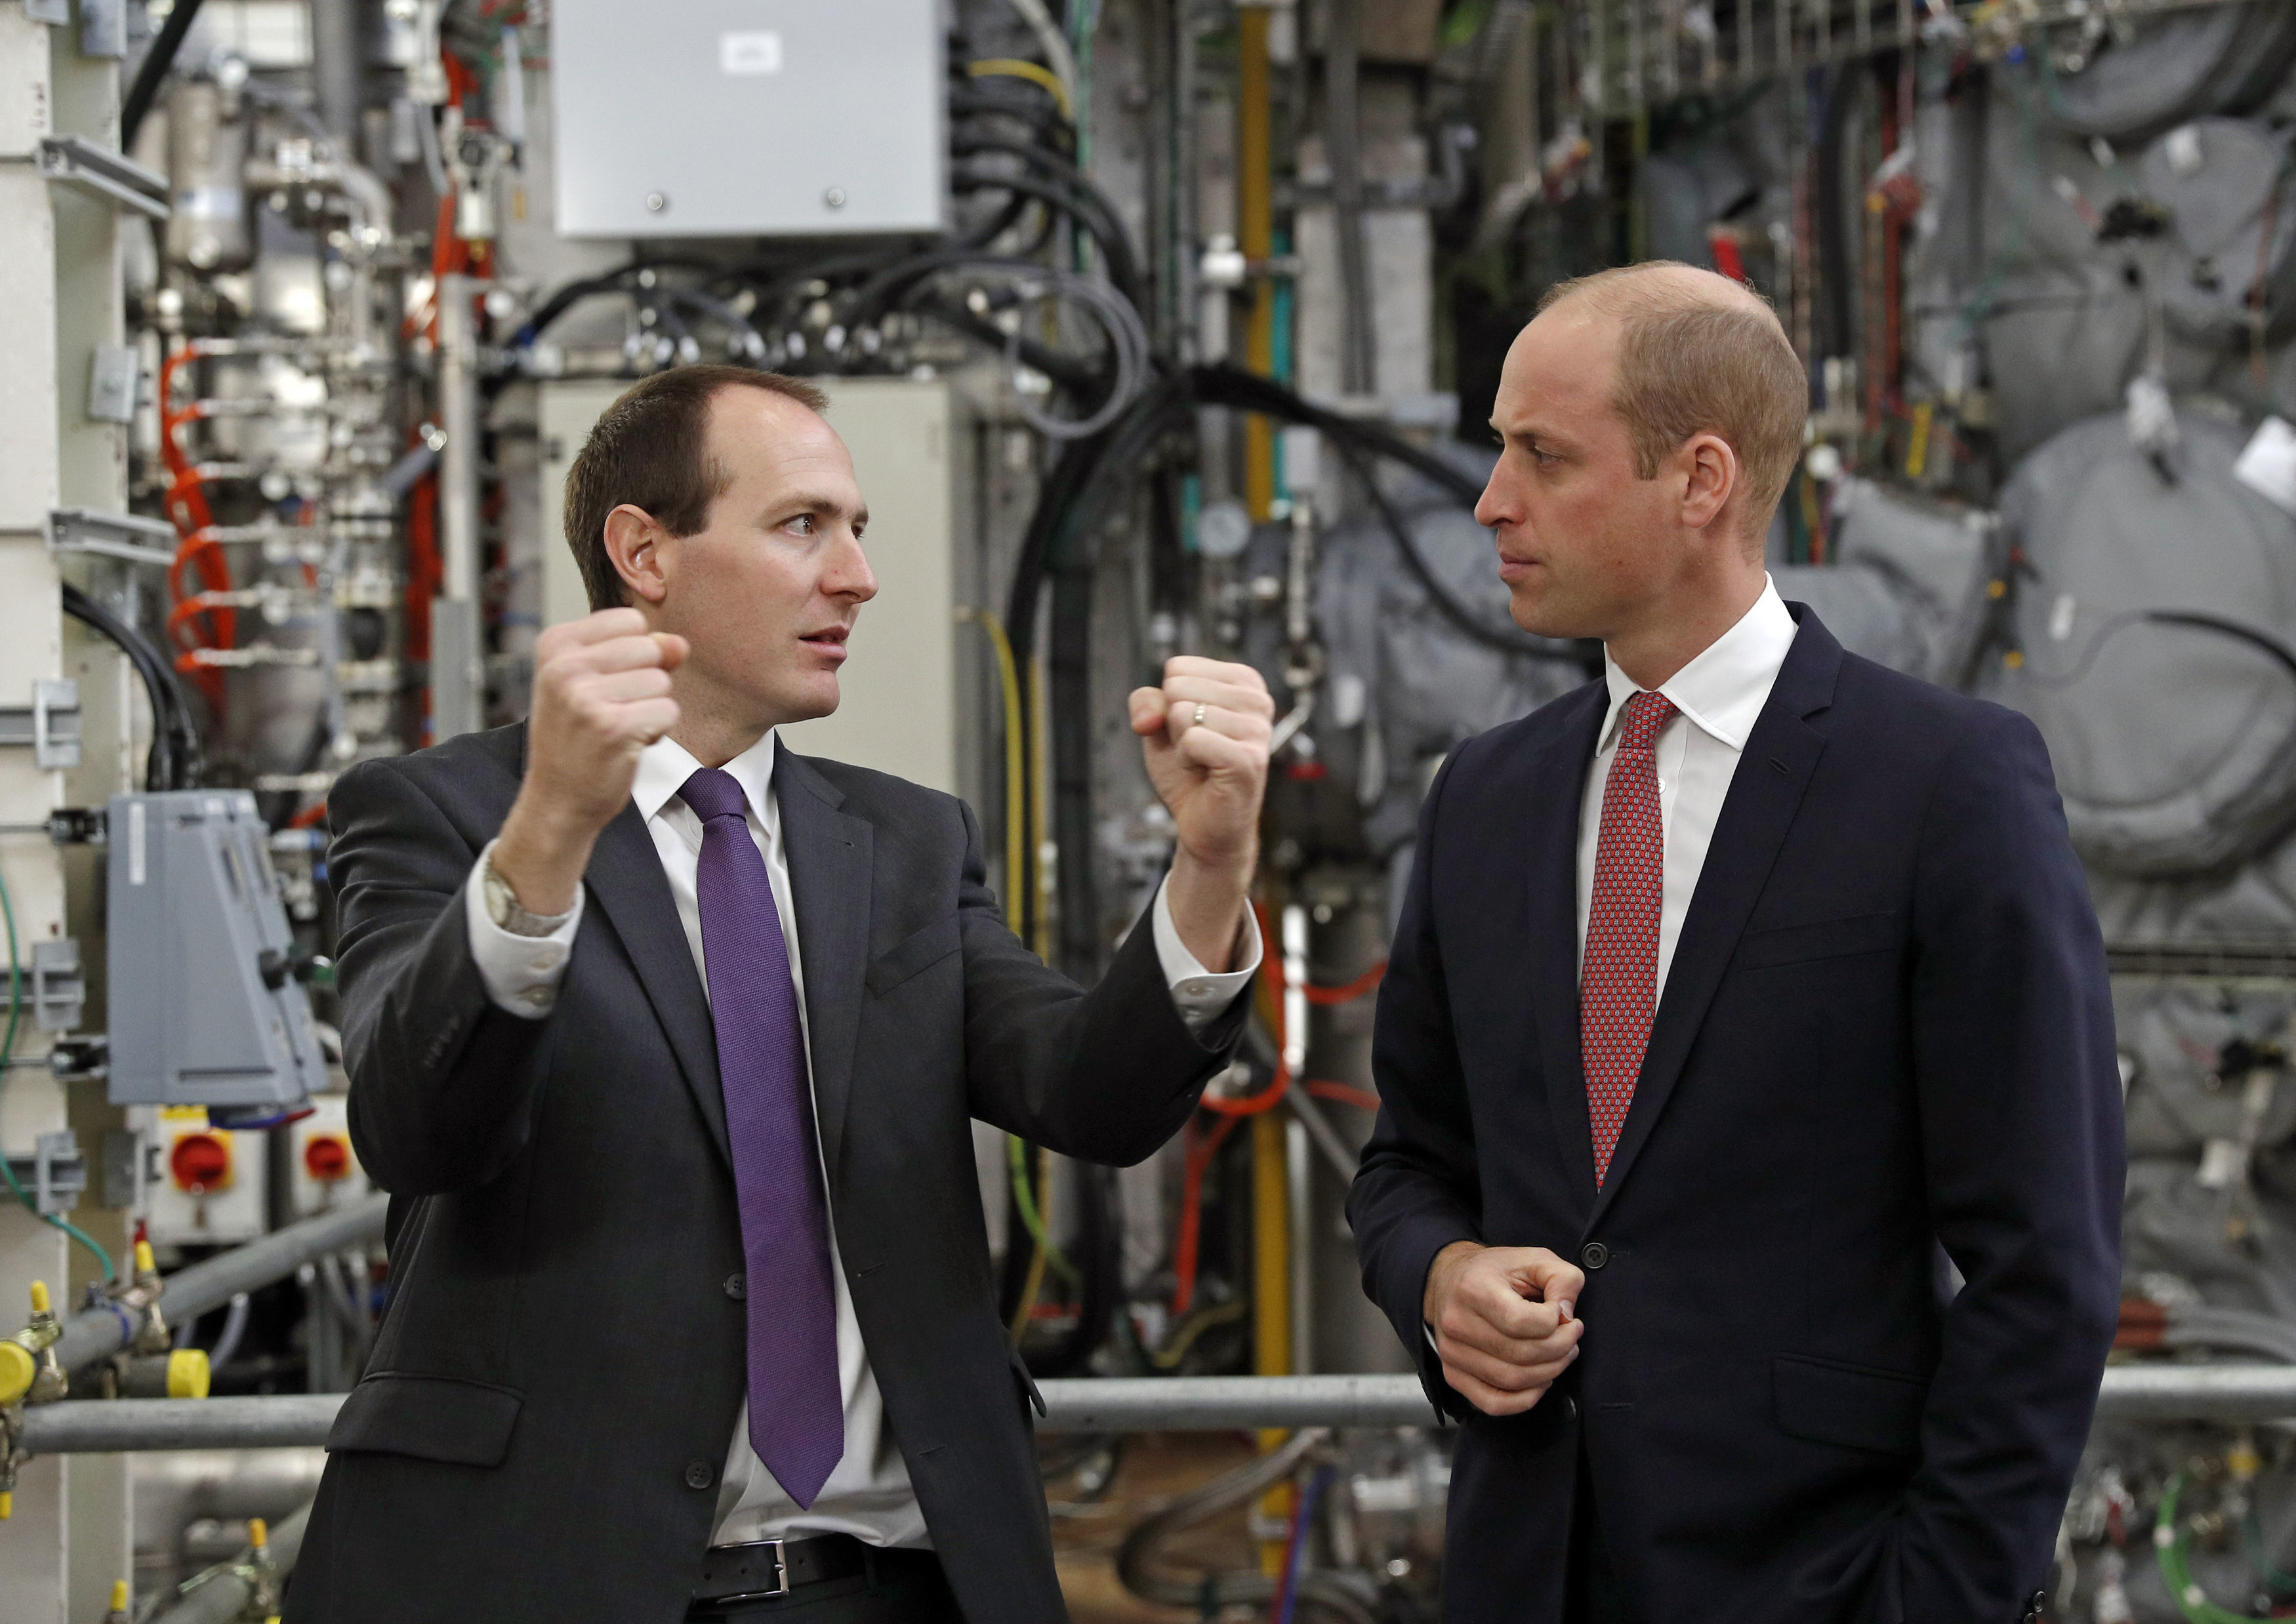 The Duke of Cambridge tours Culham Science Centre, home to the UK's new nuclear fusion experiment